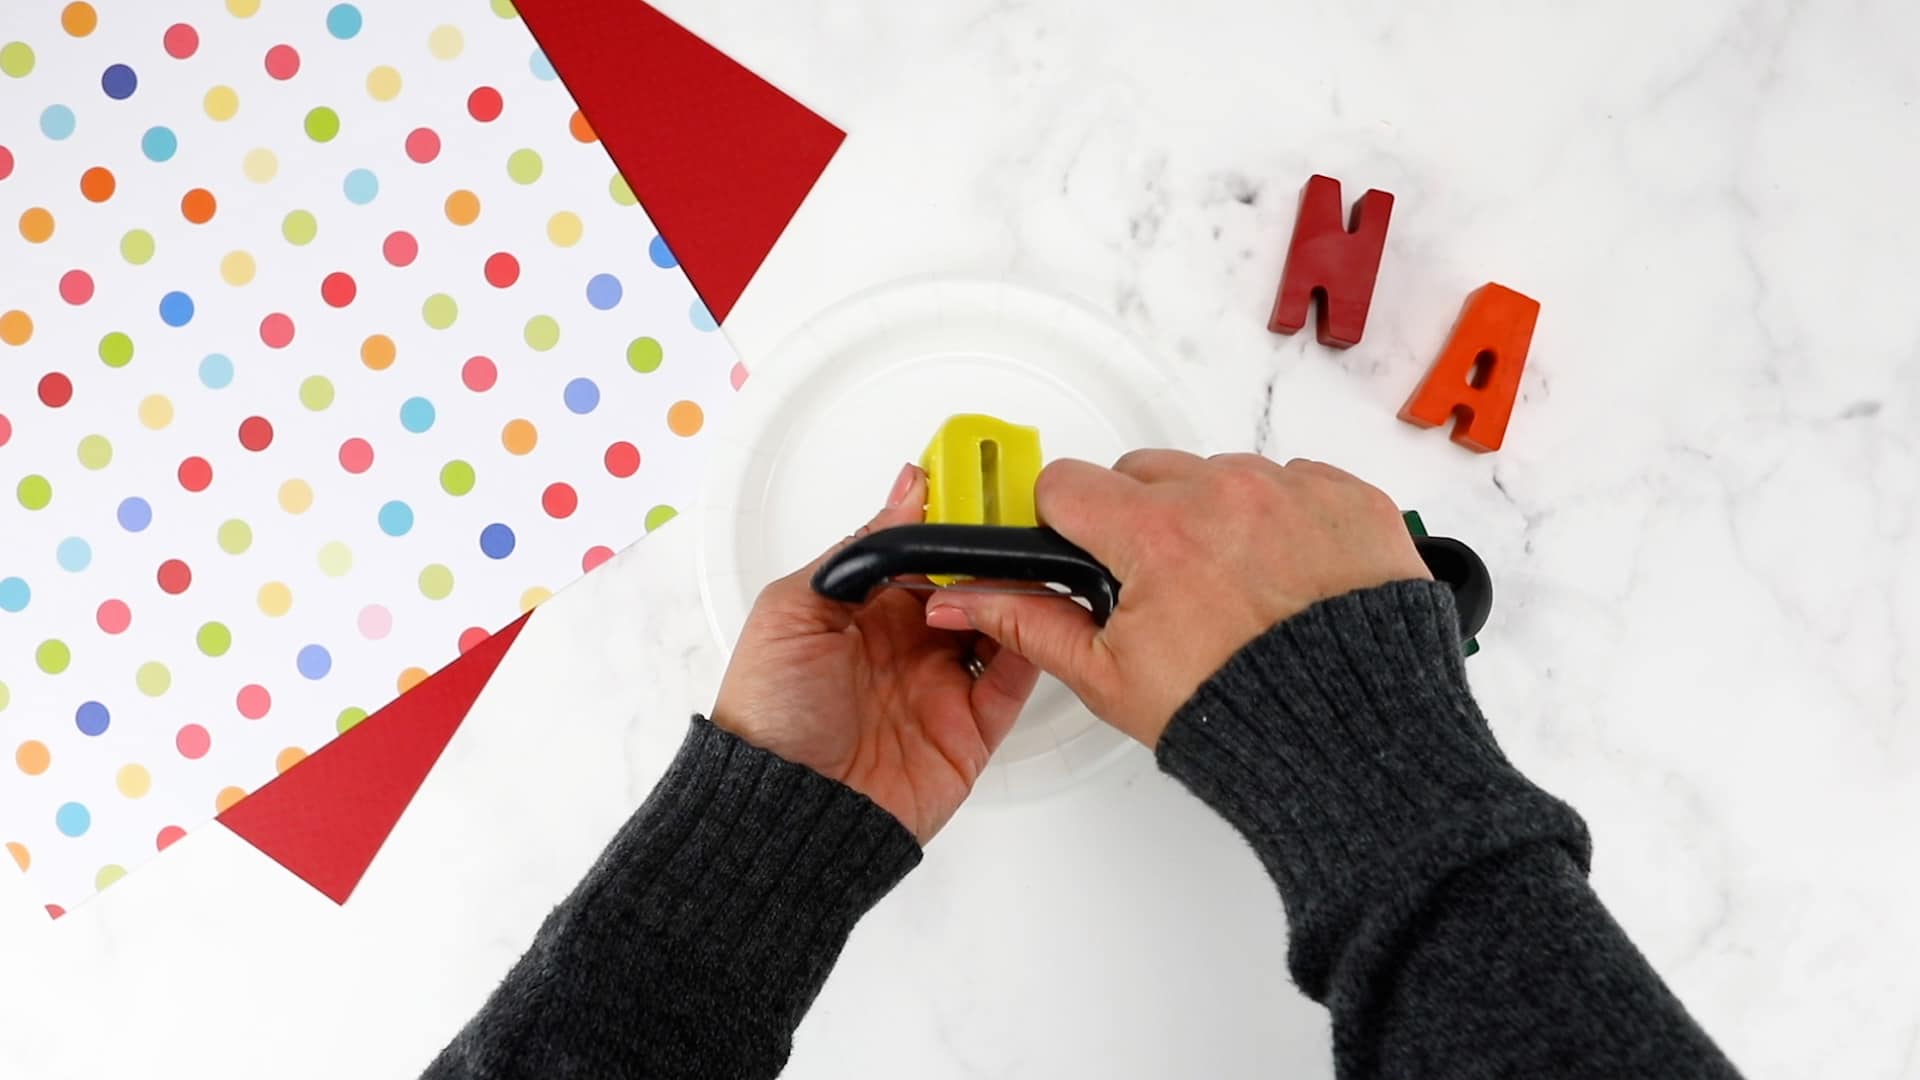 crayon name craft shaving down the letters 